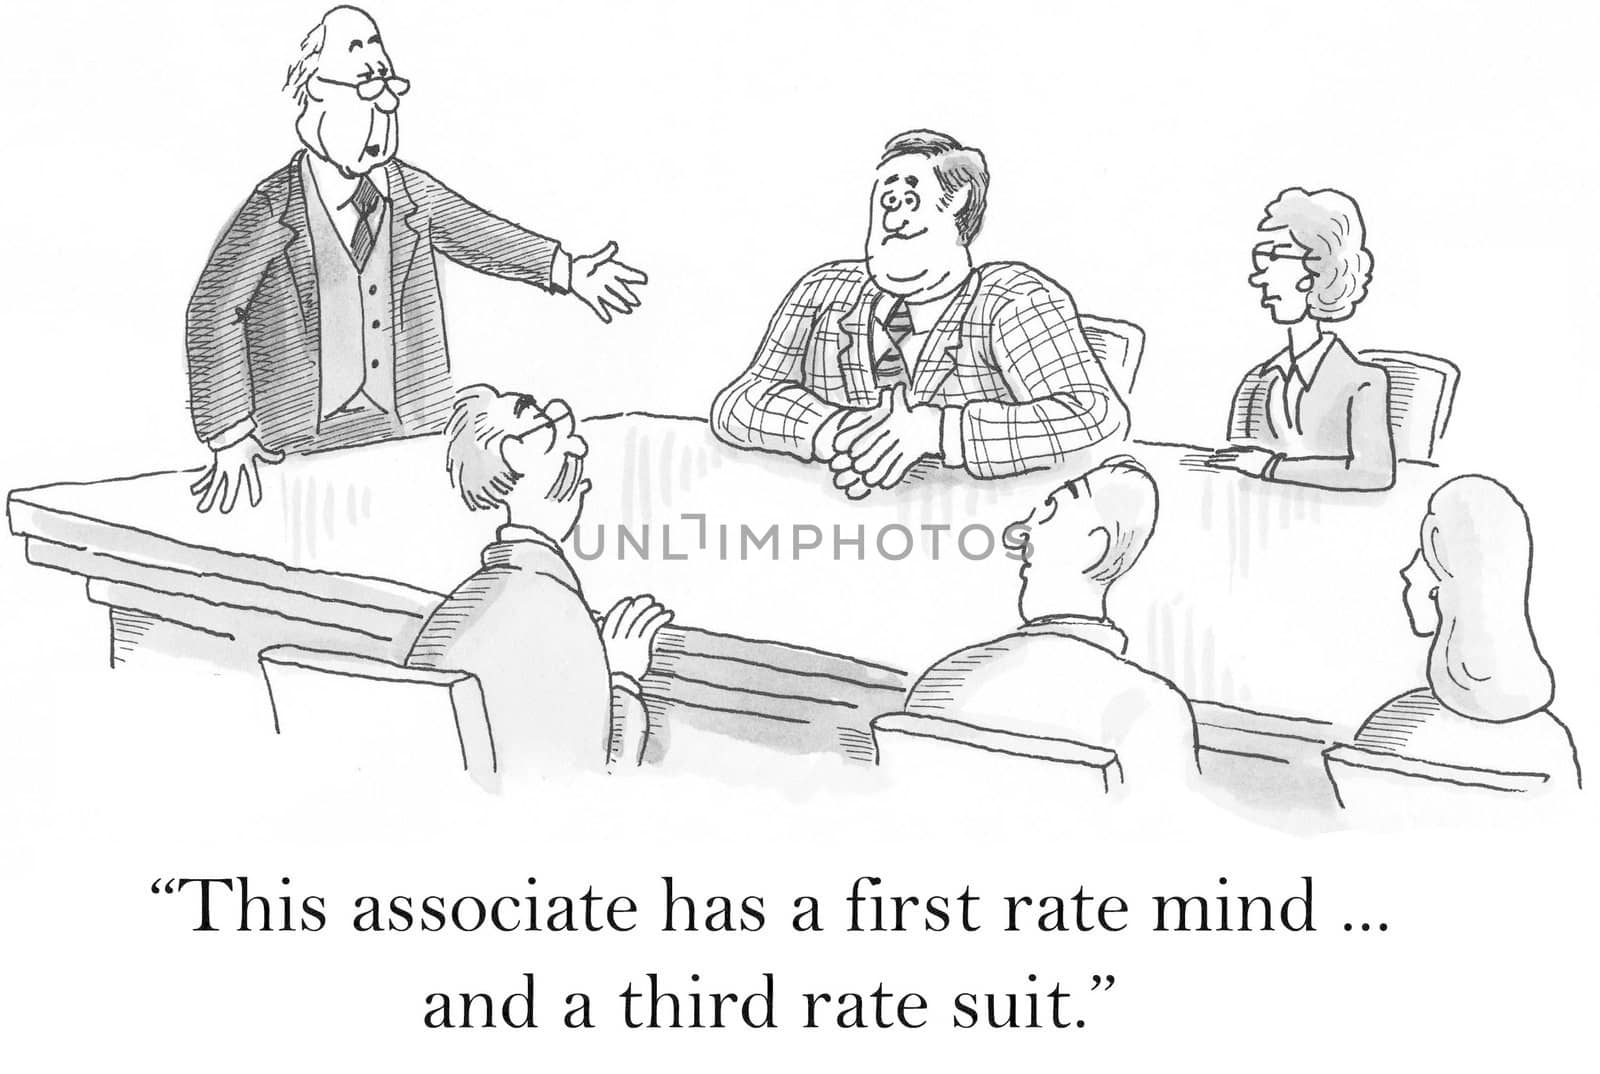 "This associate has a first rate mind... and a third rate suit."